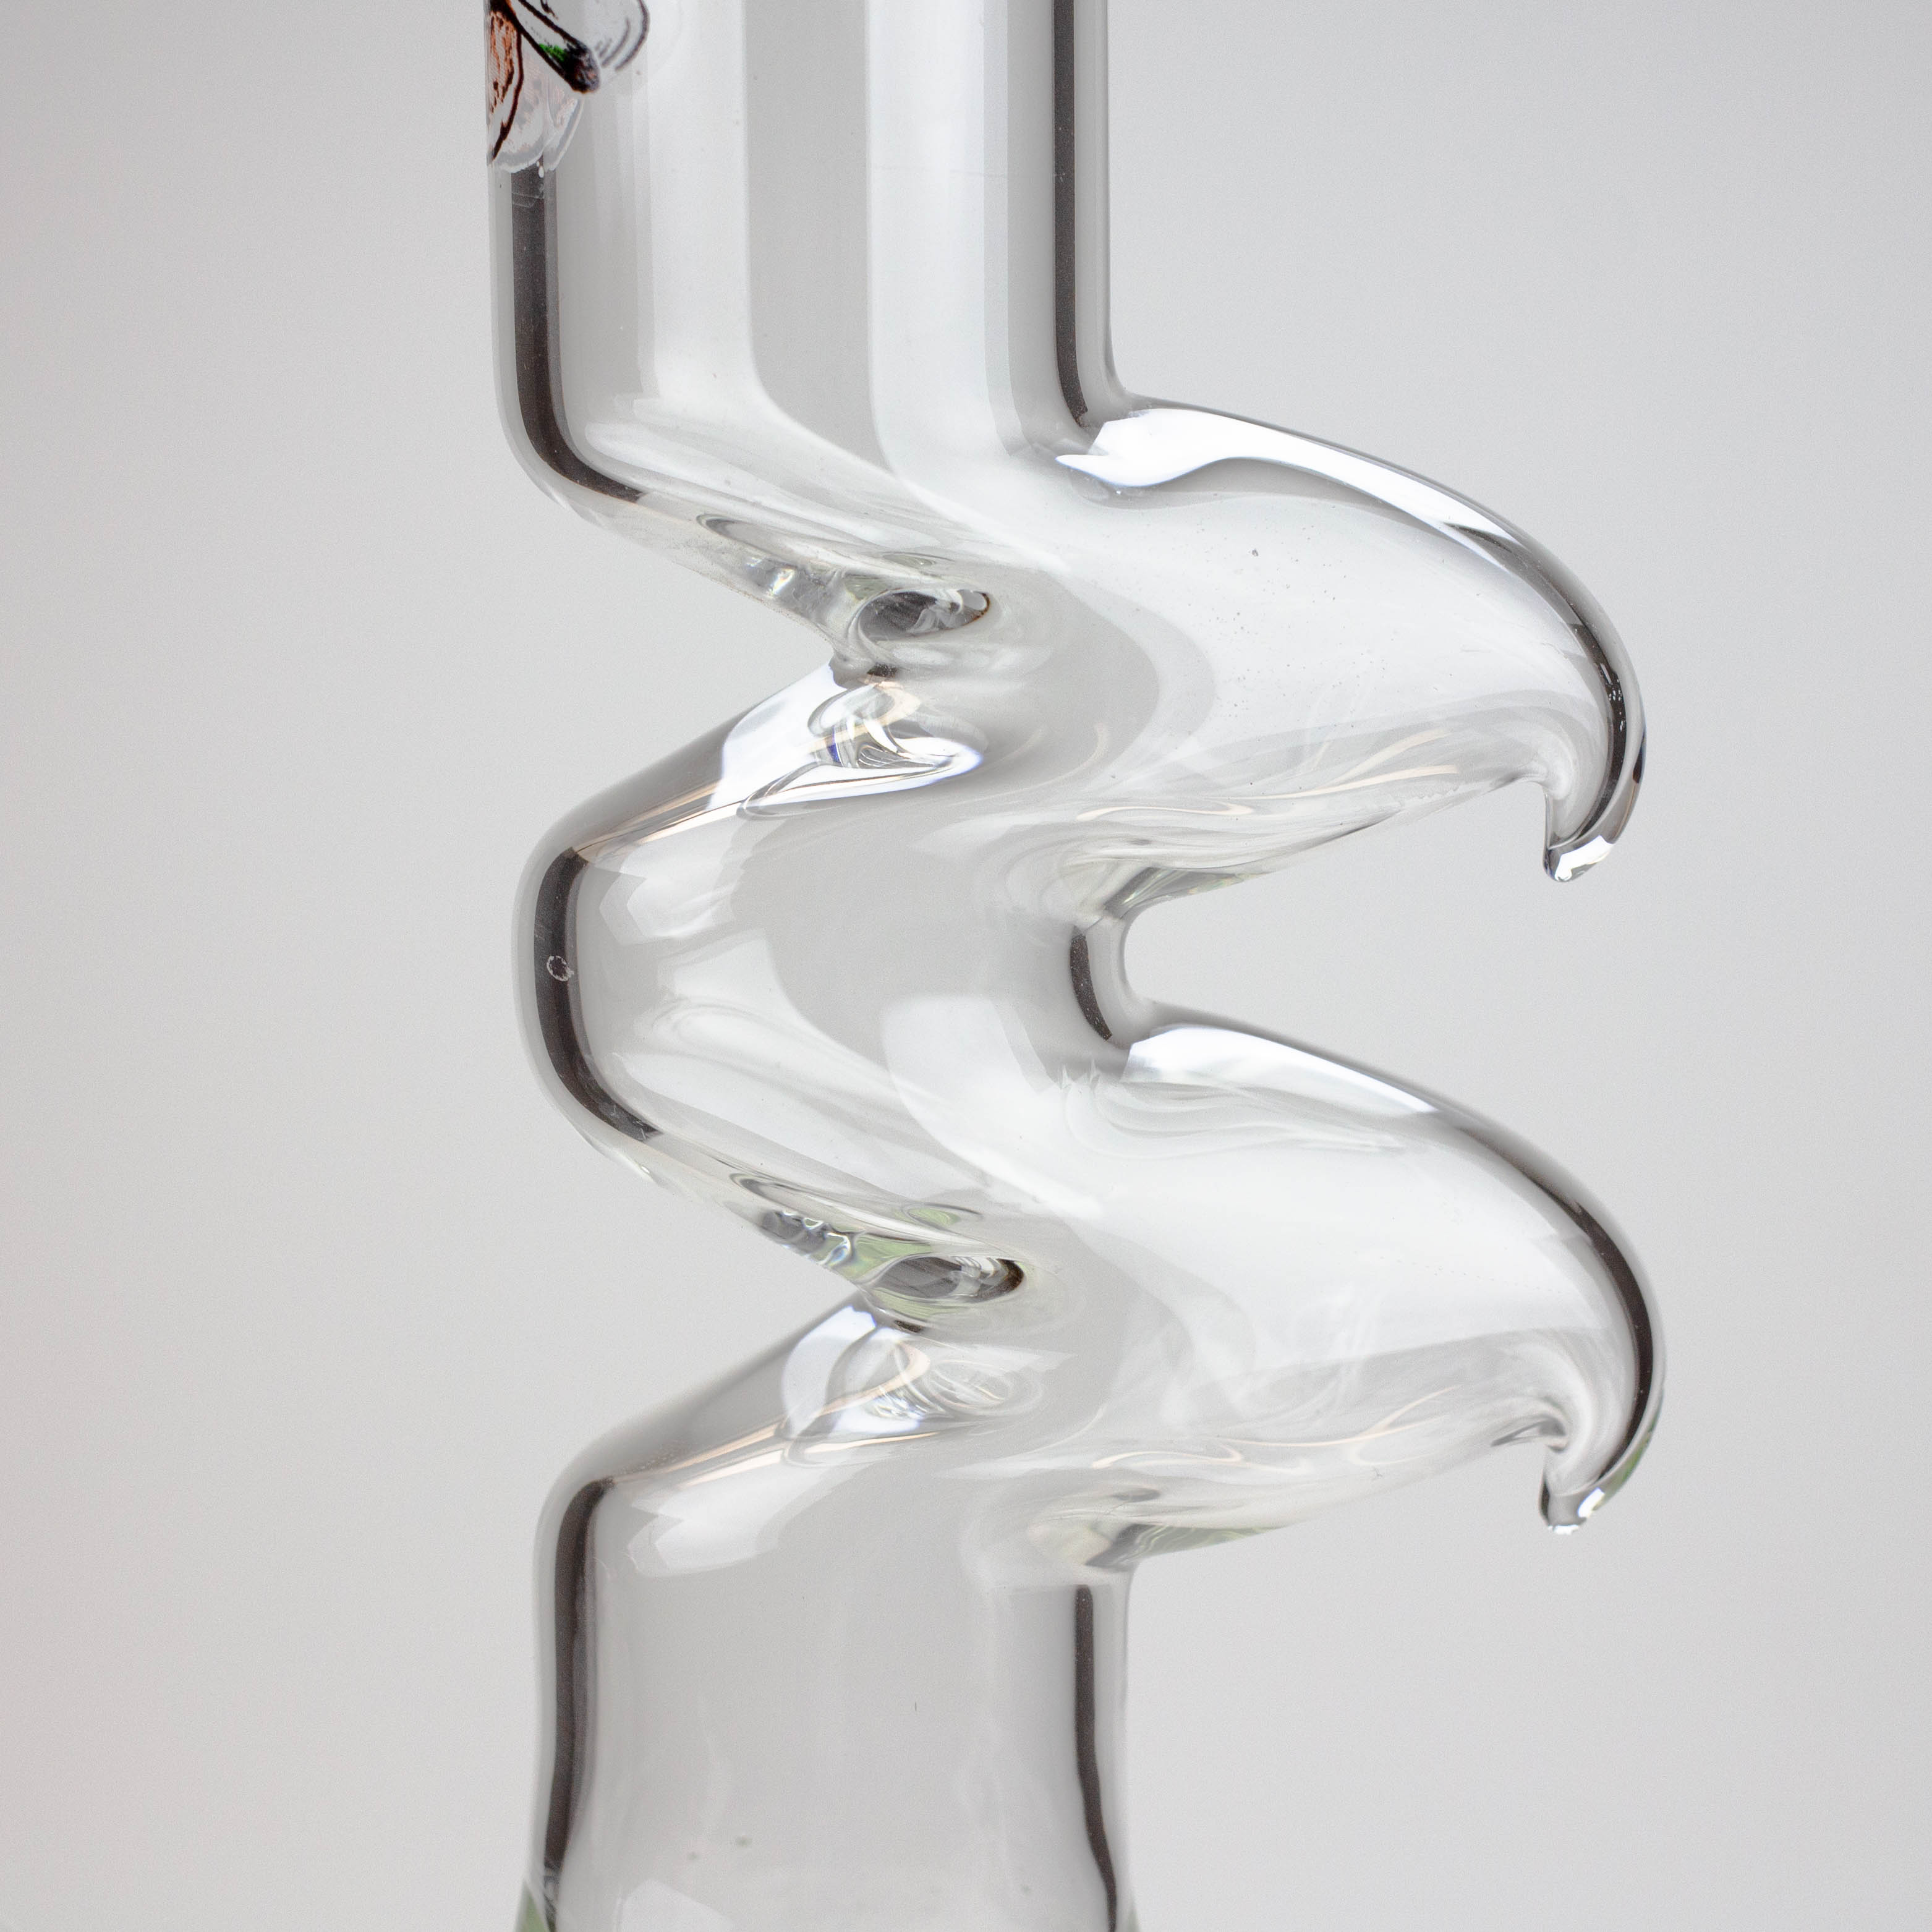 Kink zong water pipes 12"_9